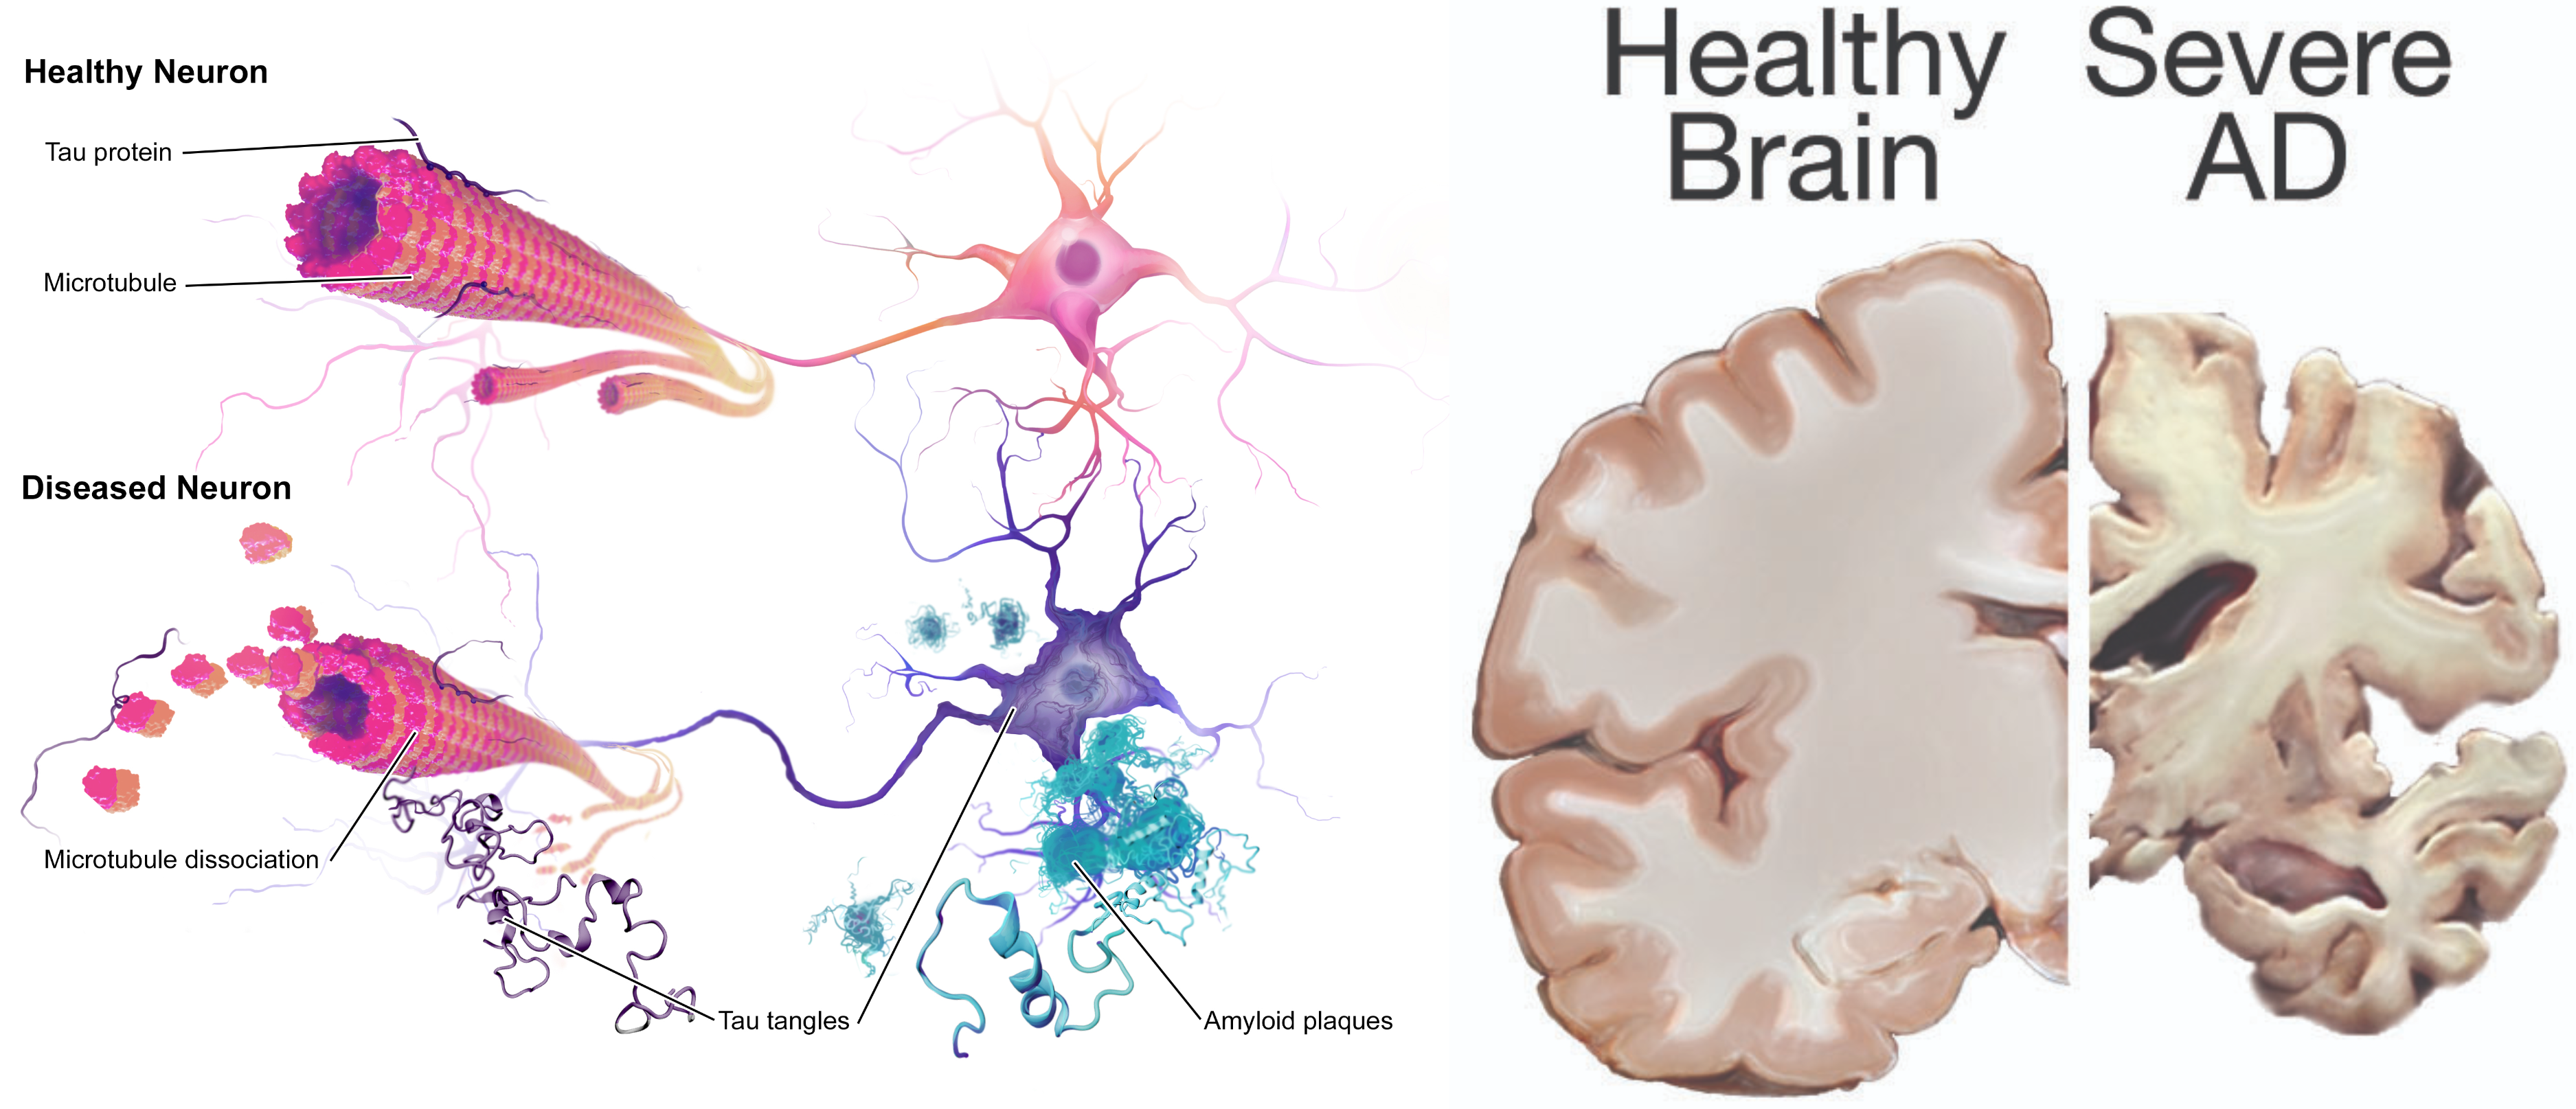 Images showing brain and neurons affected by Alzheimer’s Disease, with labels